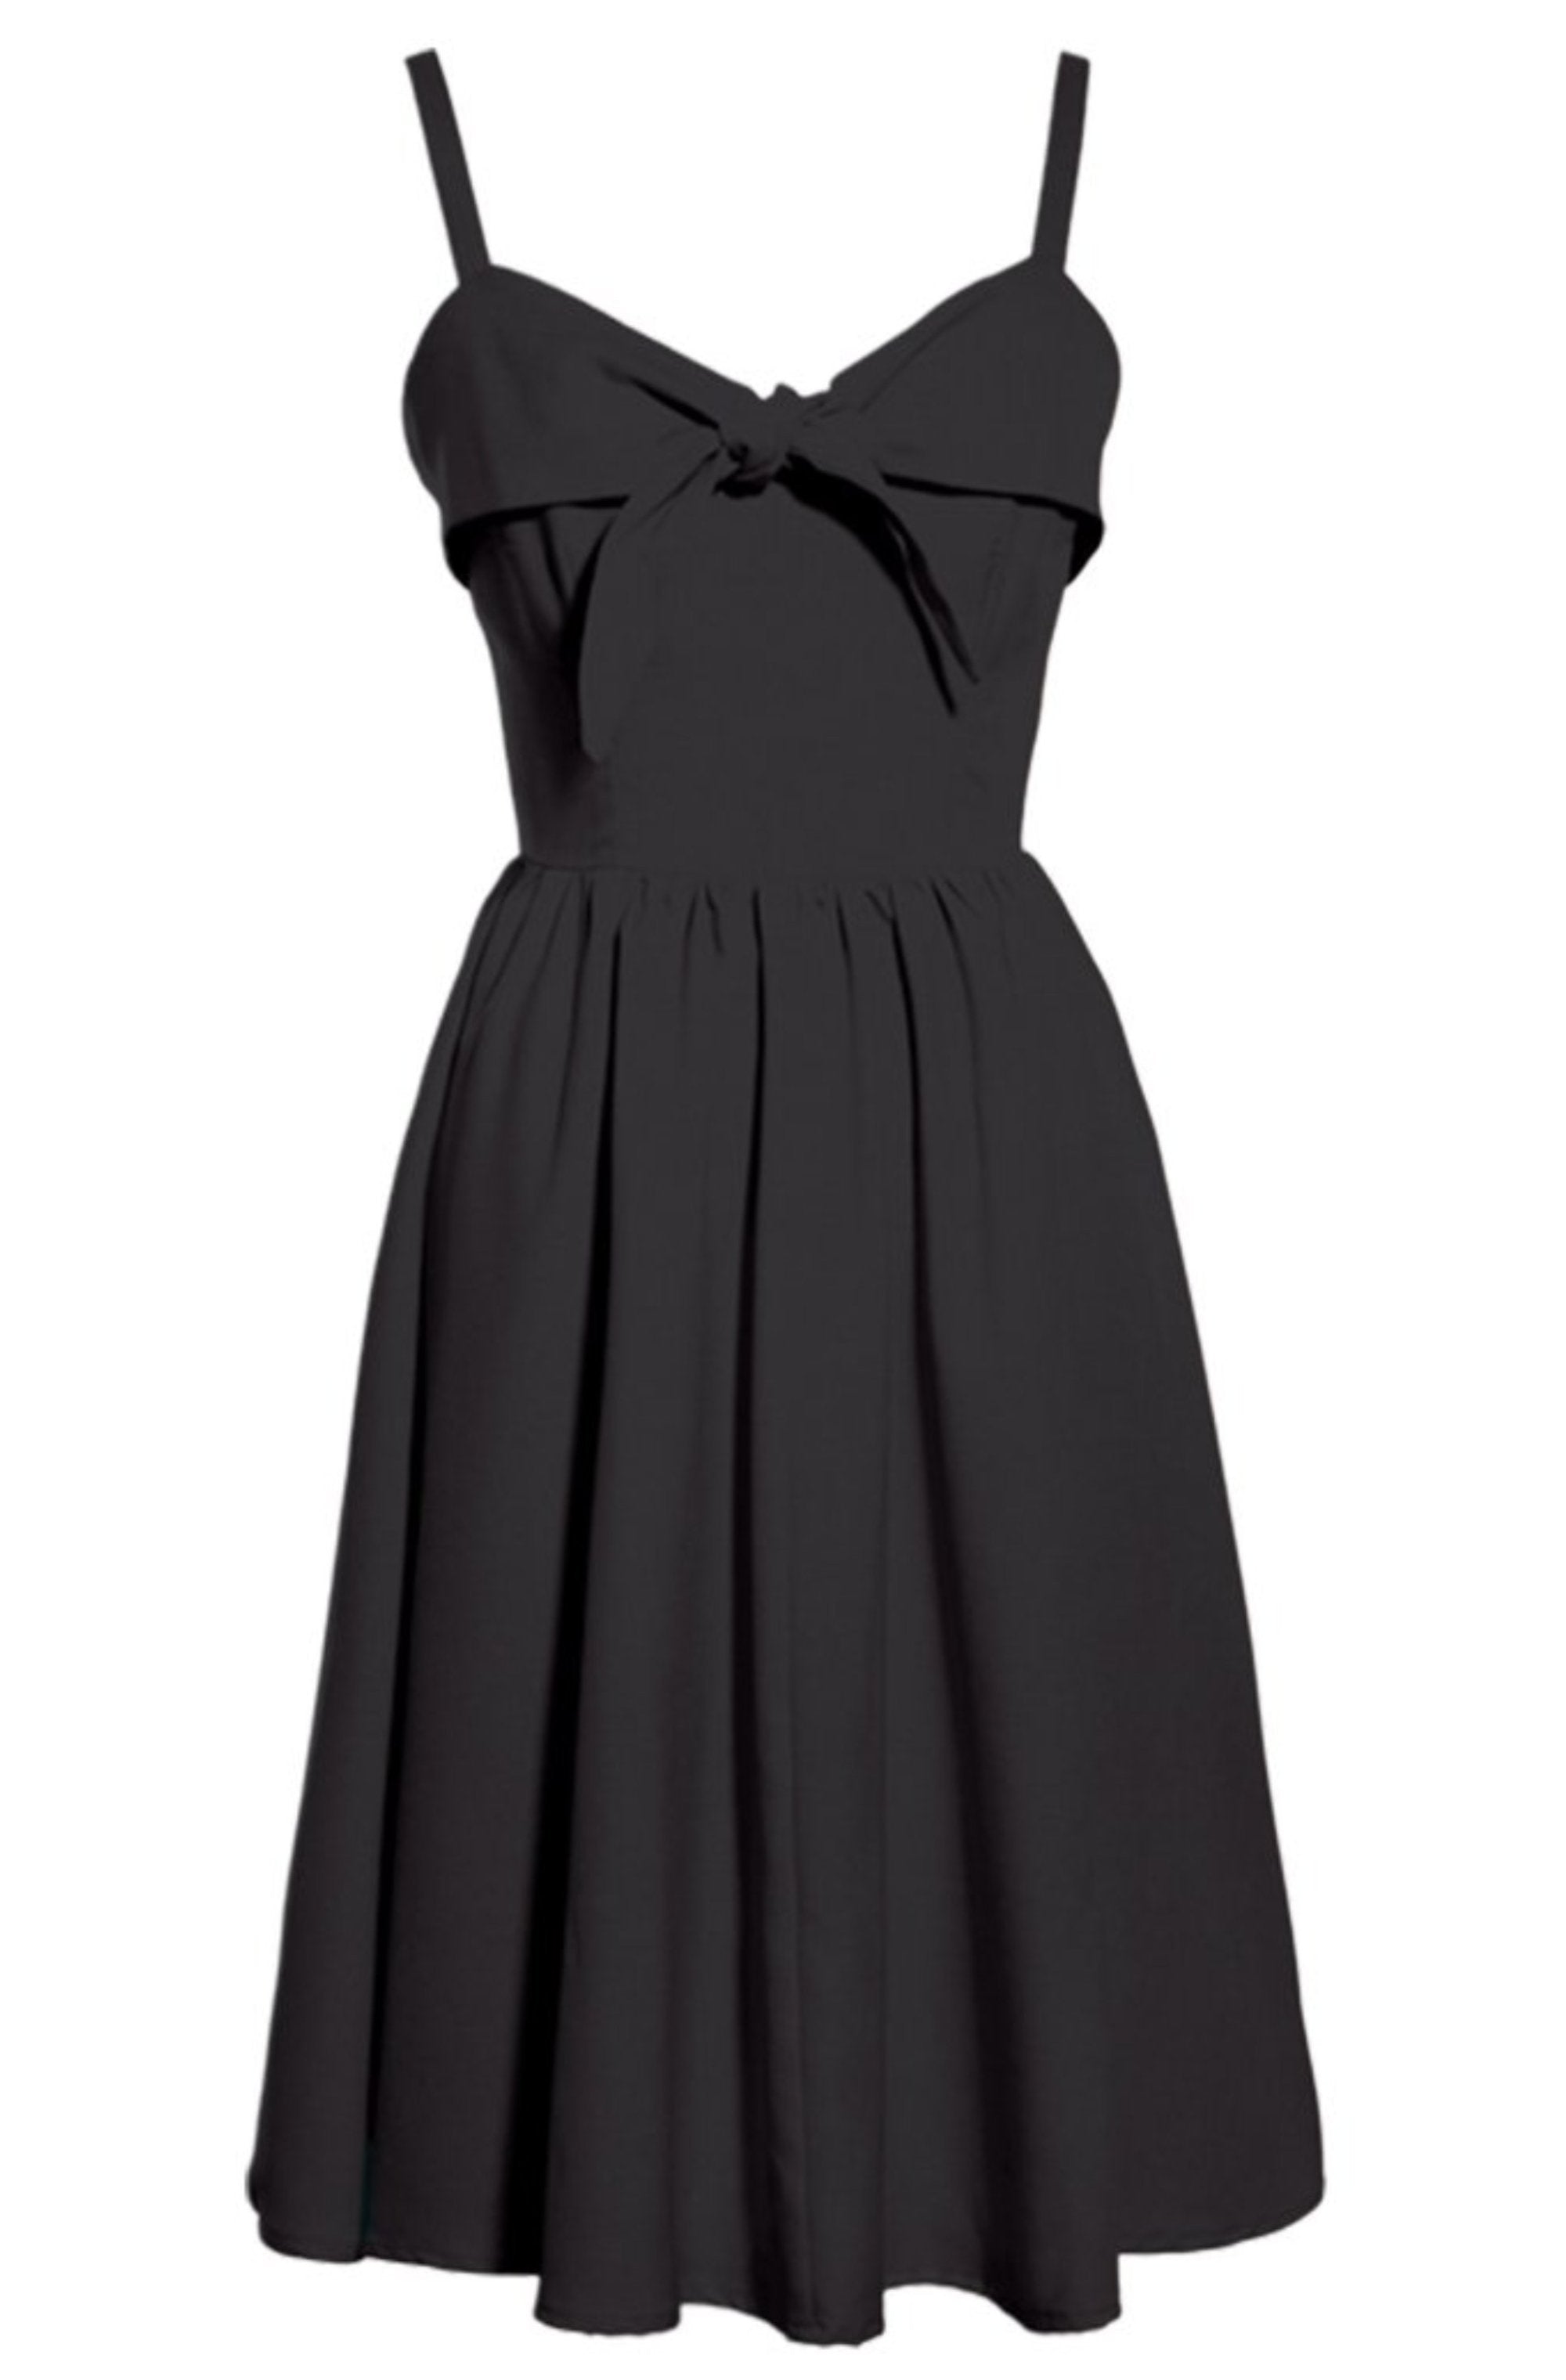 The LUCILLE DRESS - BLACK